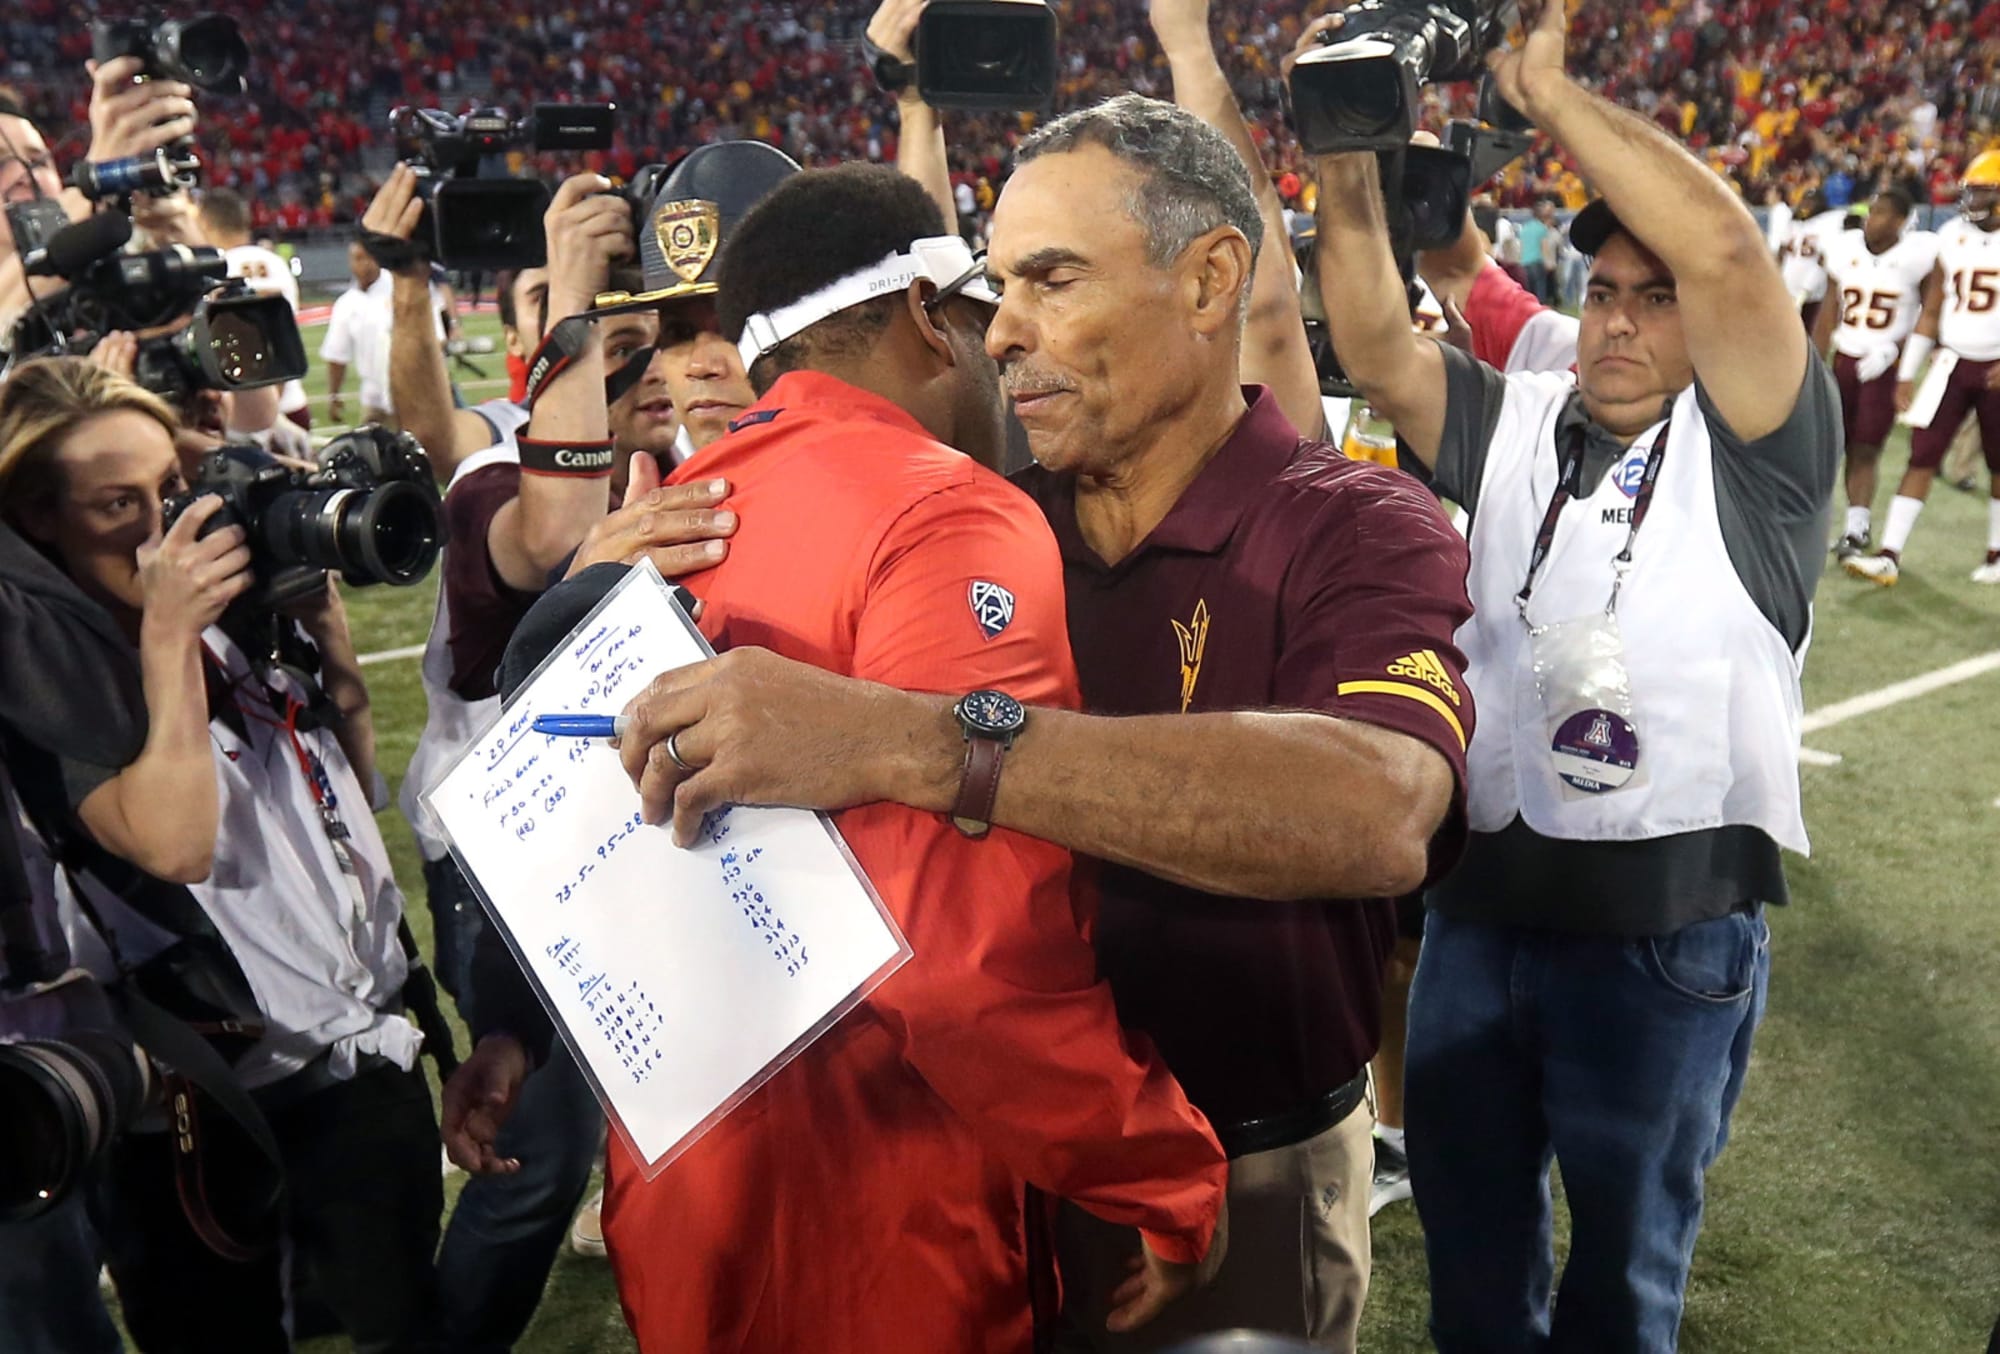 ASU Football Territorial Cup victory provides look into future